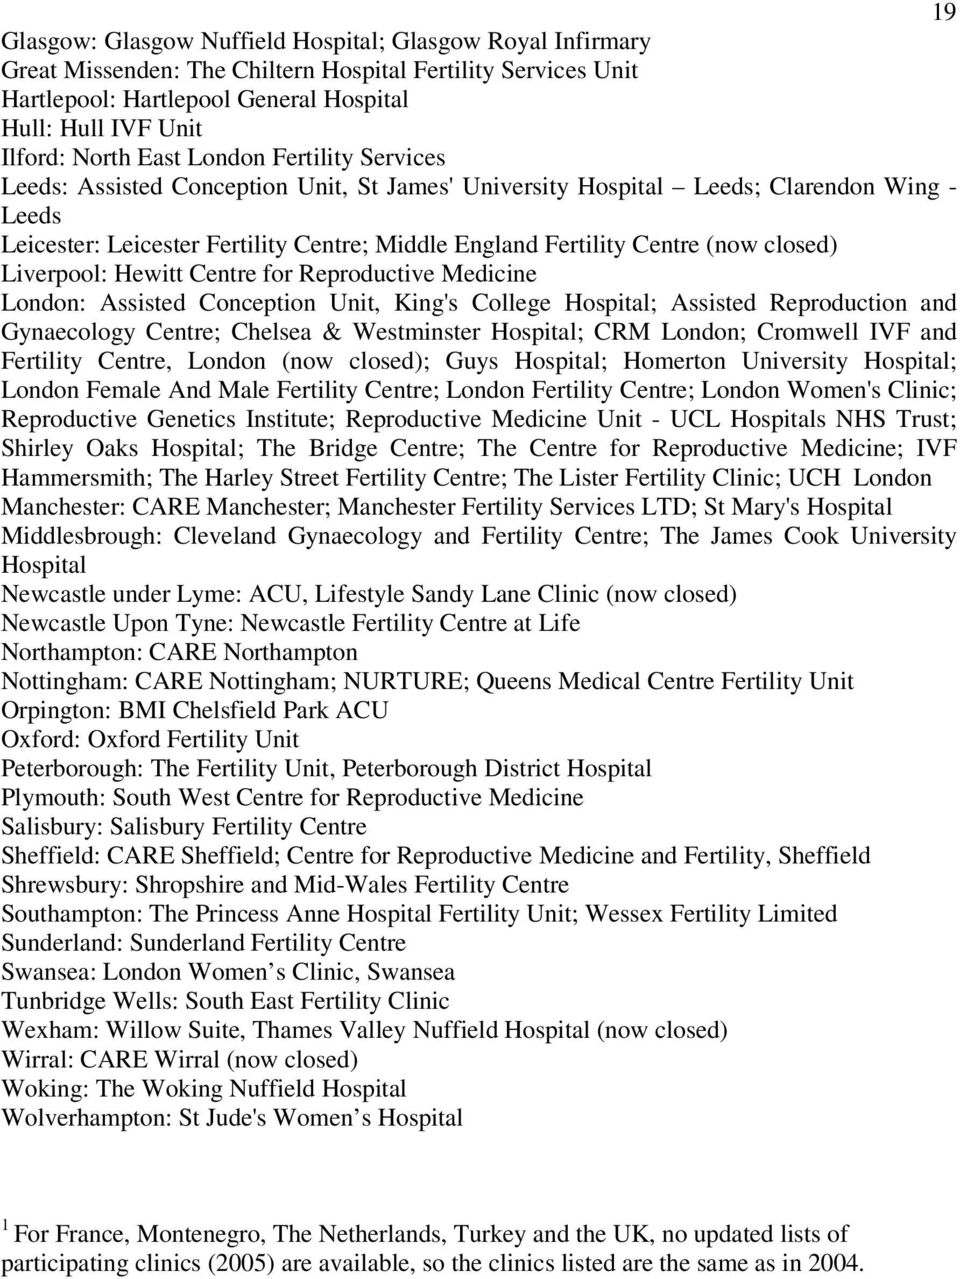 closed) Liverpool: Hewitt Centre for Reproductive Medicine London: Assisted Conception Unit, King's College Hospital; Assisted Reproduction and Gynaecology Centre; Chelsea & Westminster Hospital; CRM